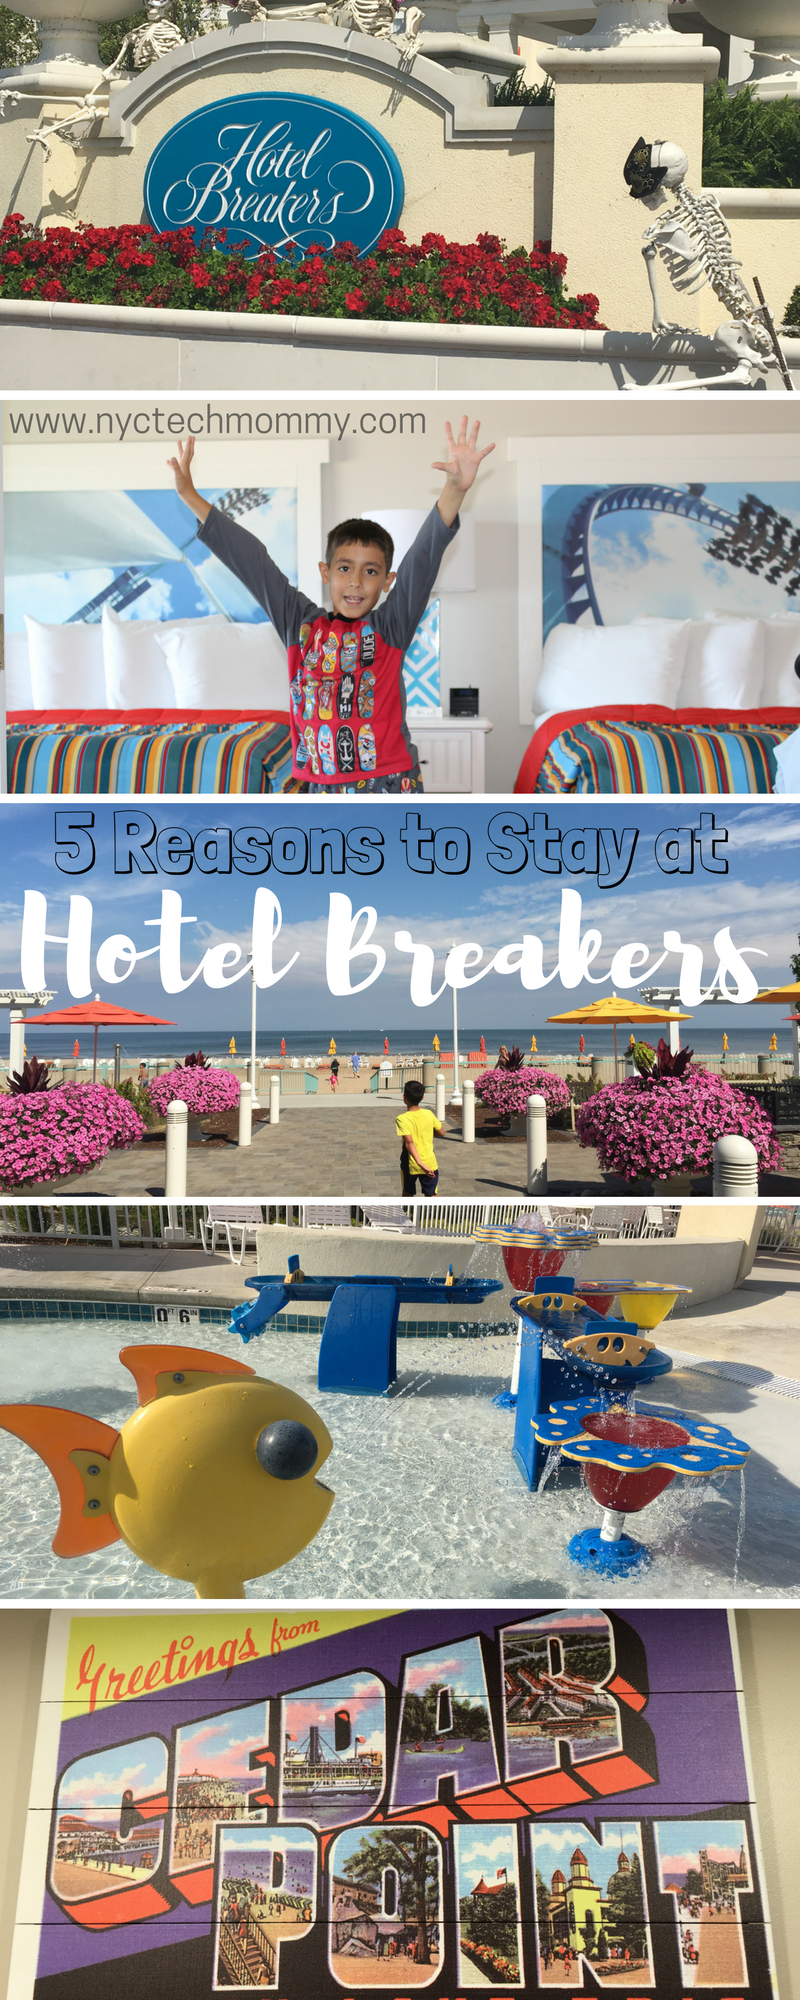 5 Reasons to Stay at Hotel Breakers - Cedar Point